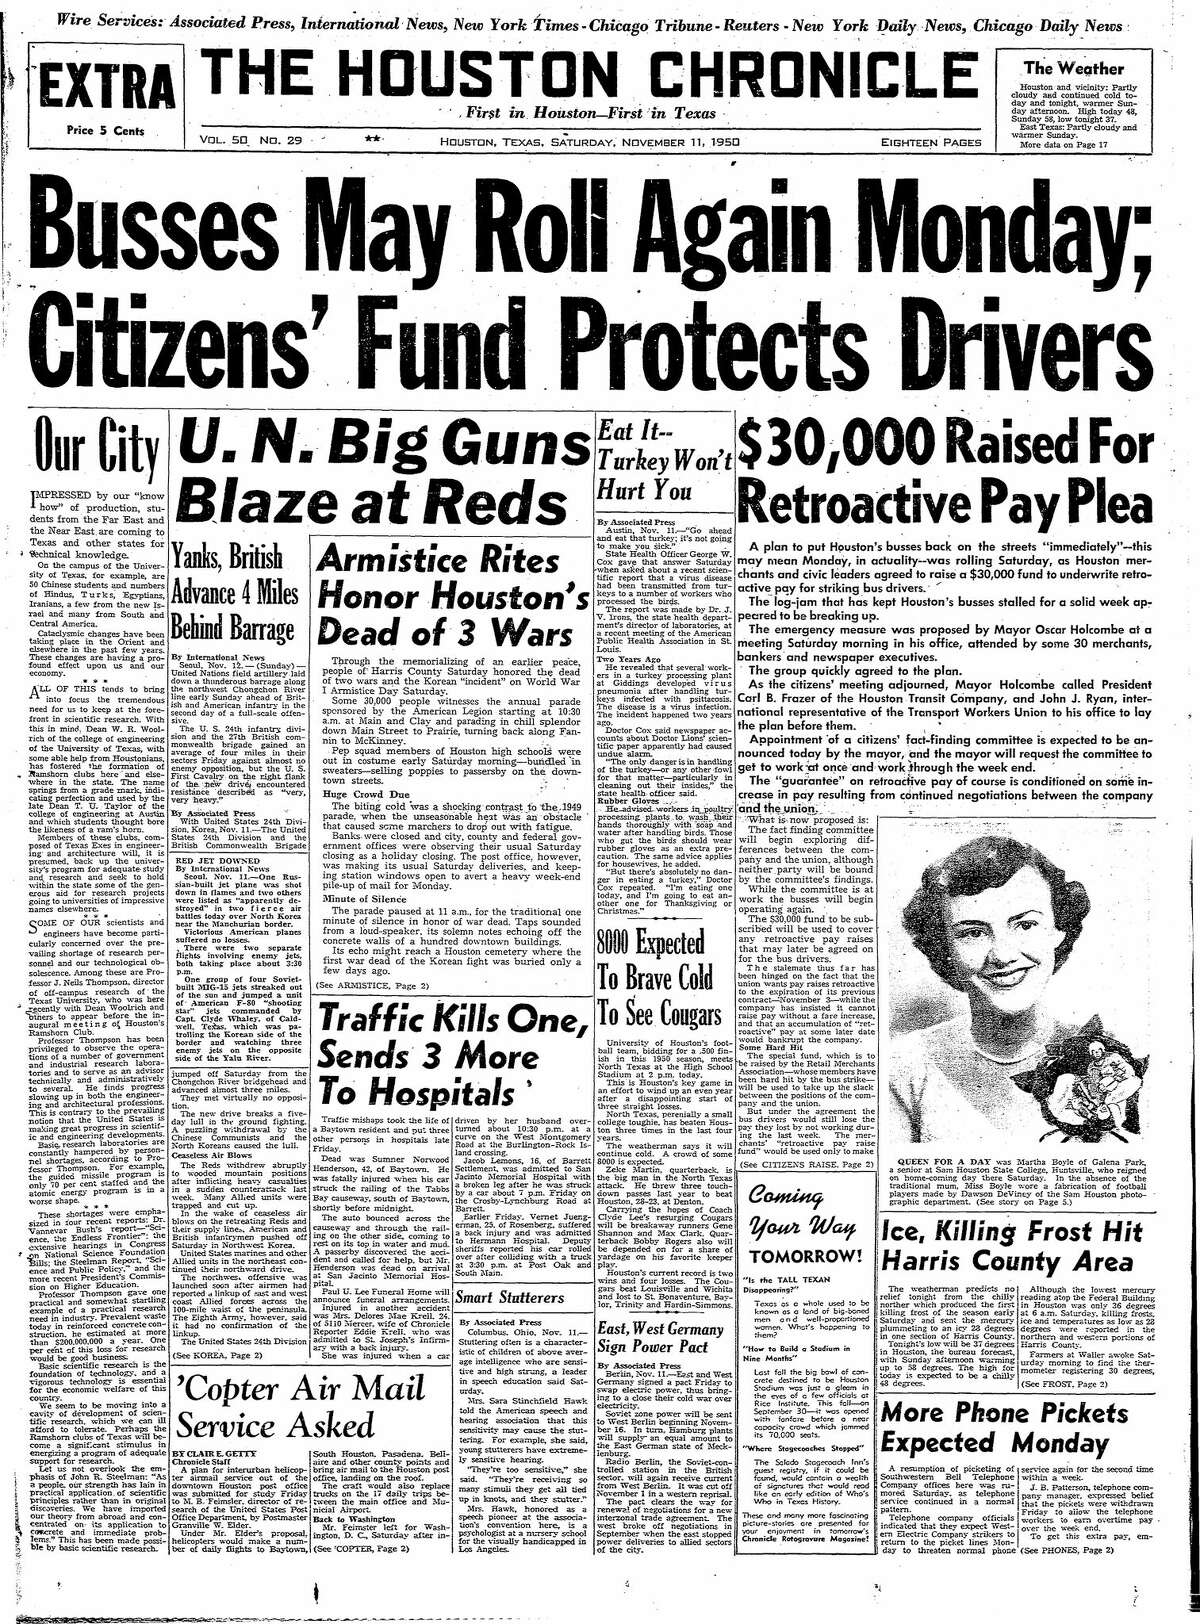 Houston Chronicle front page for Nov. 11, 1950.